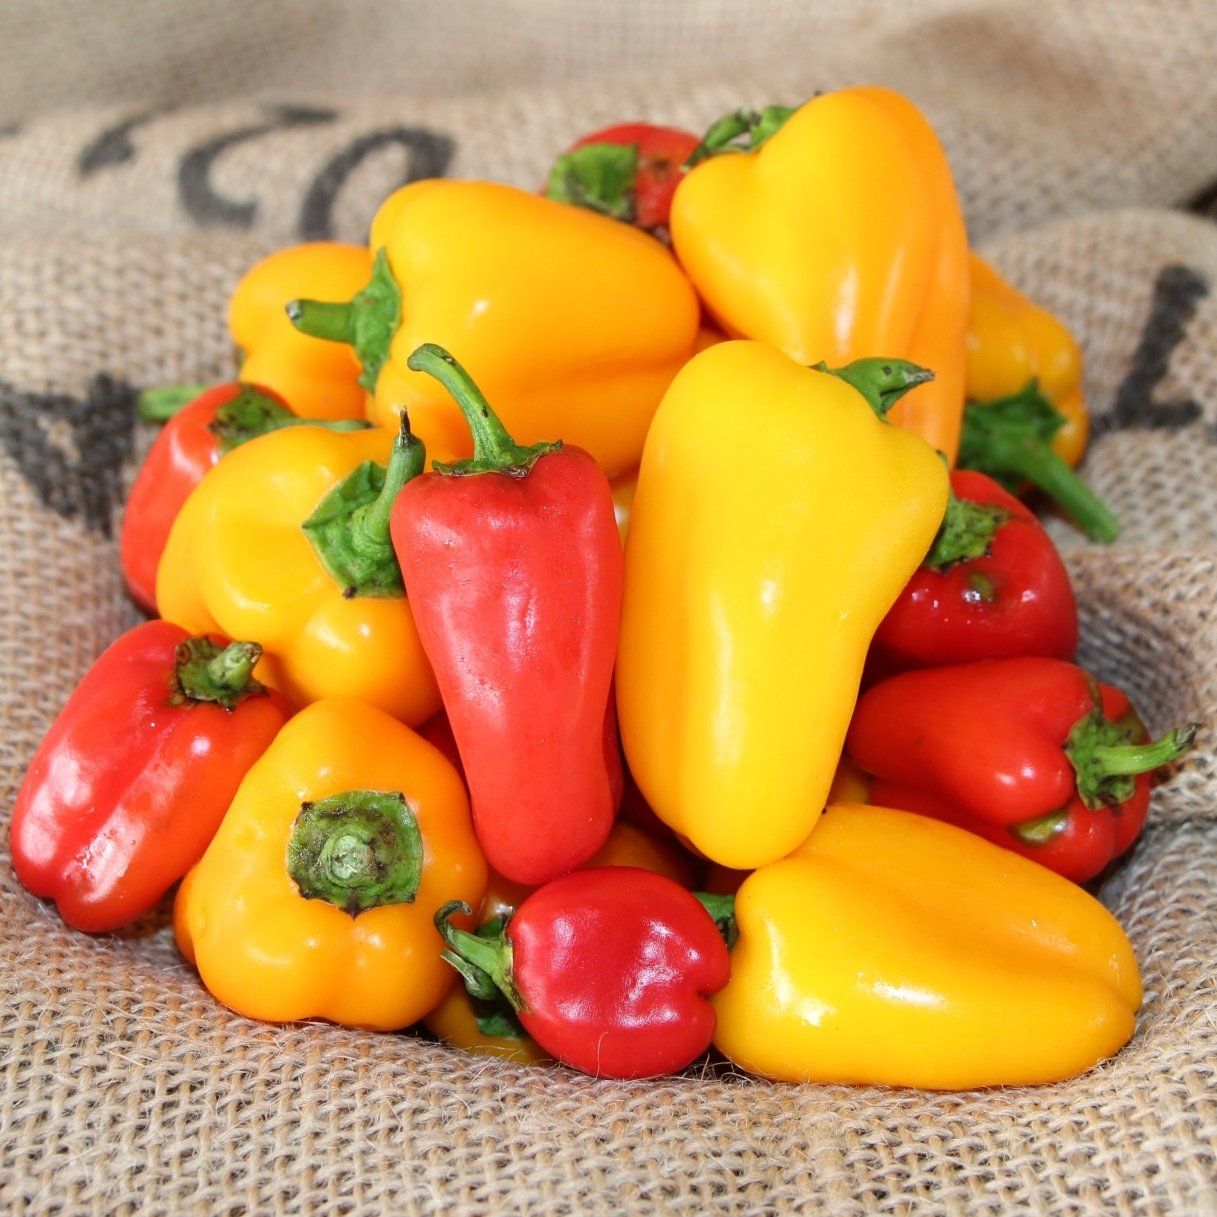 locally grown peppers